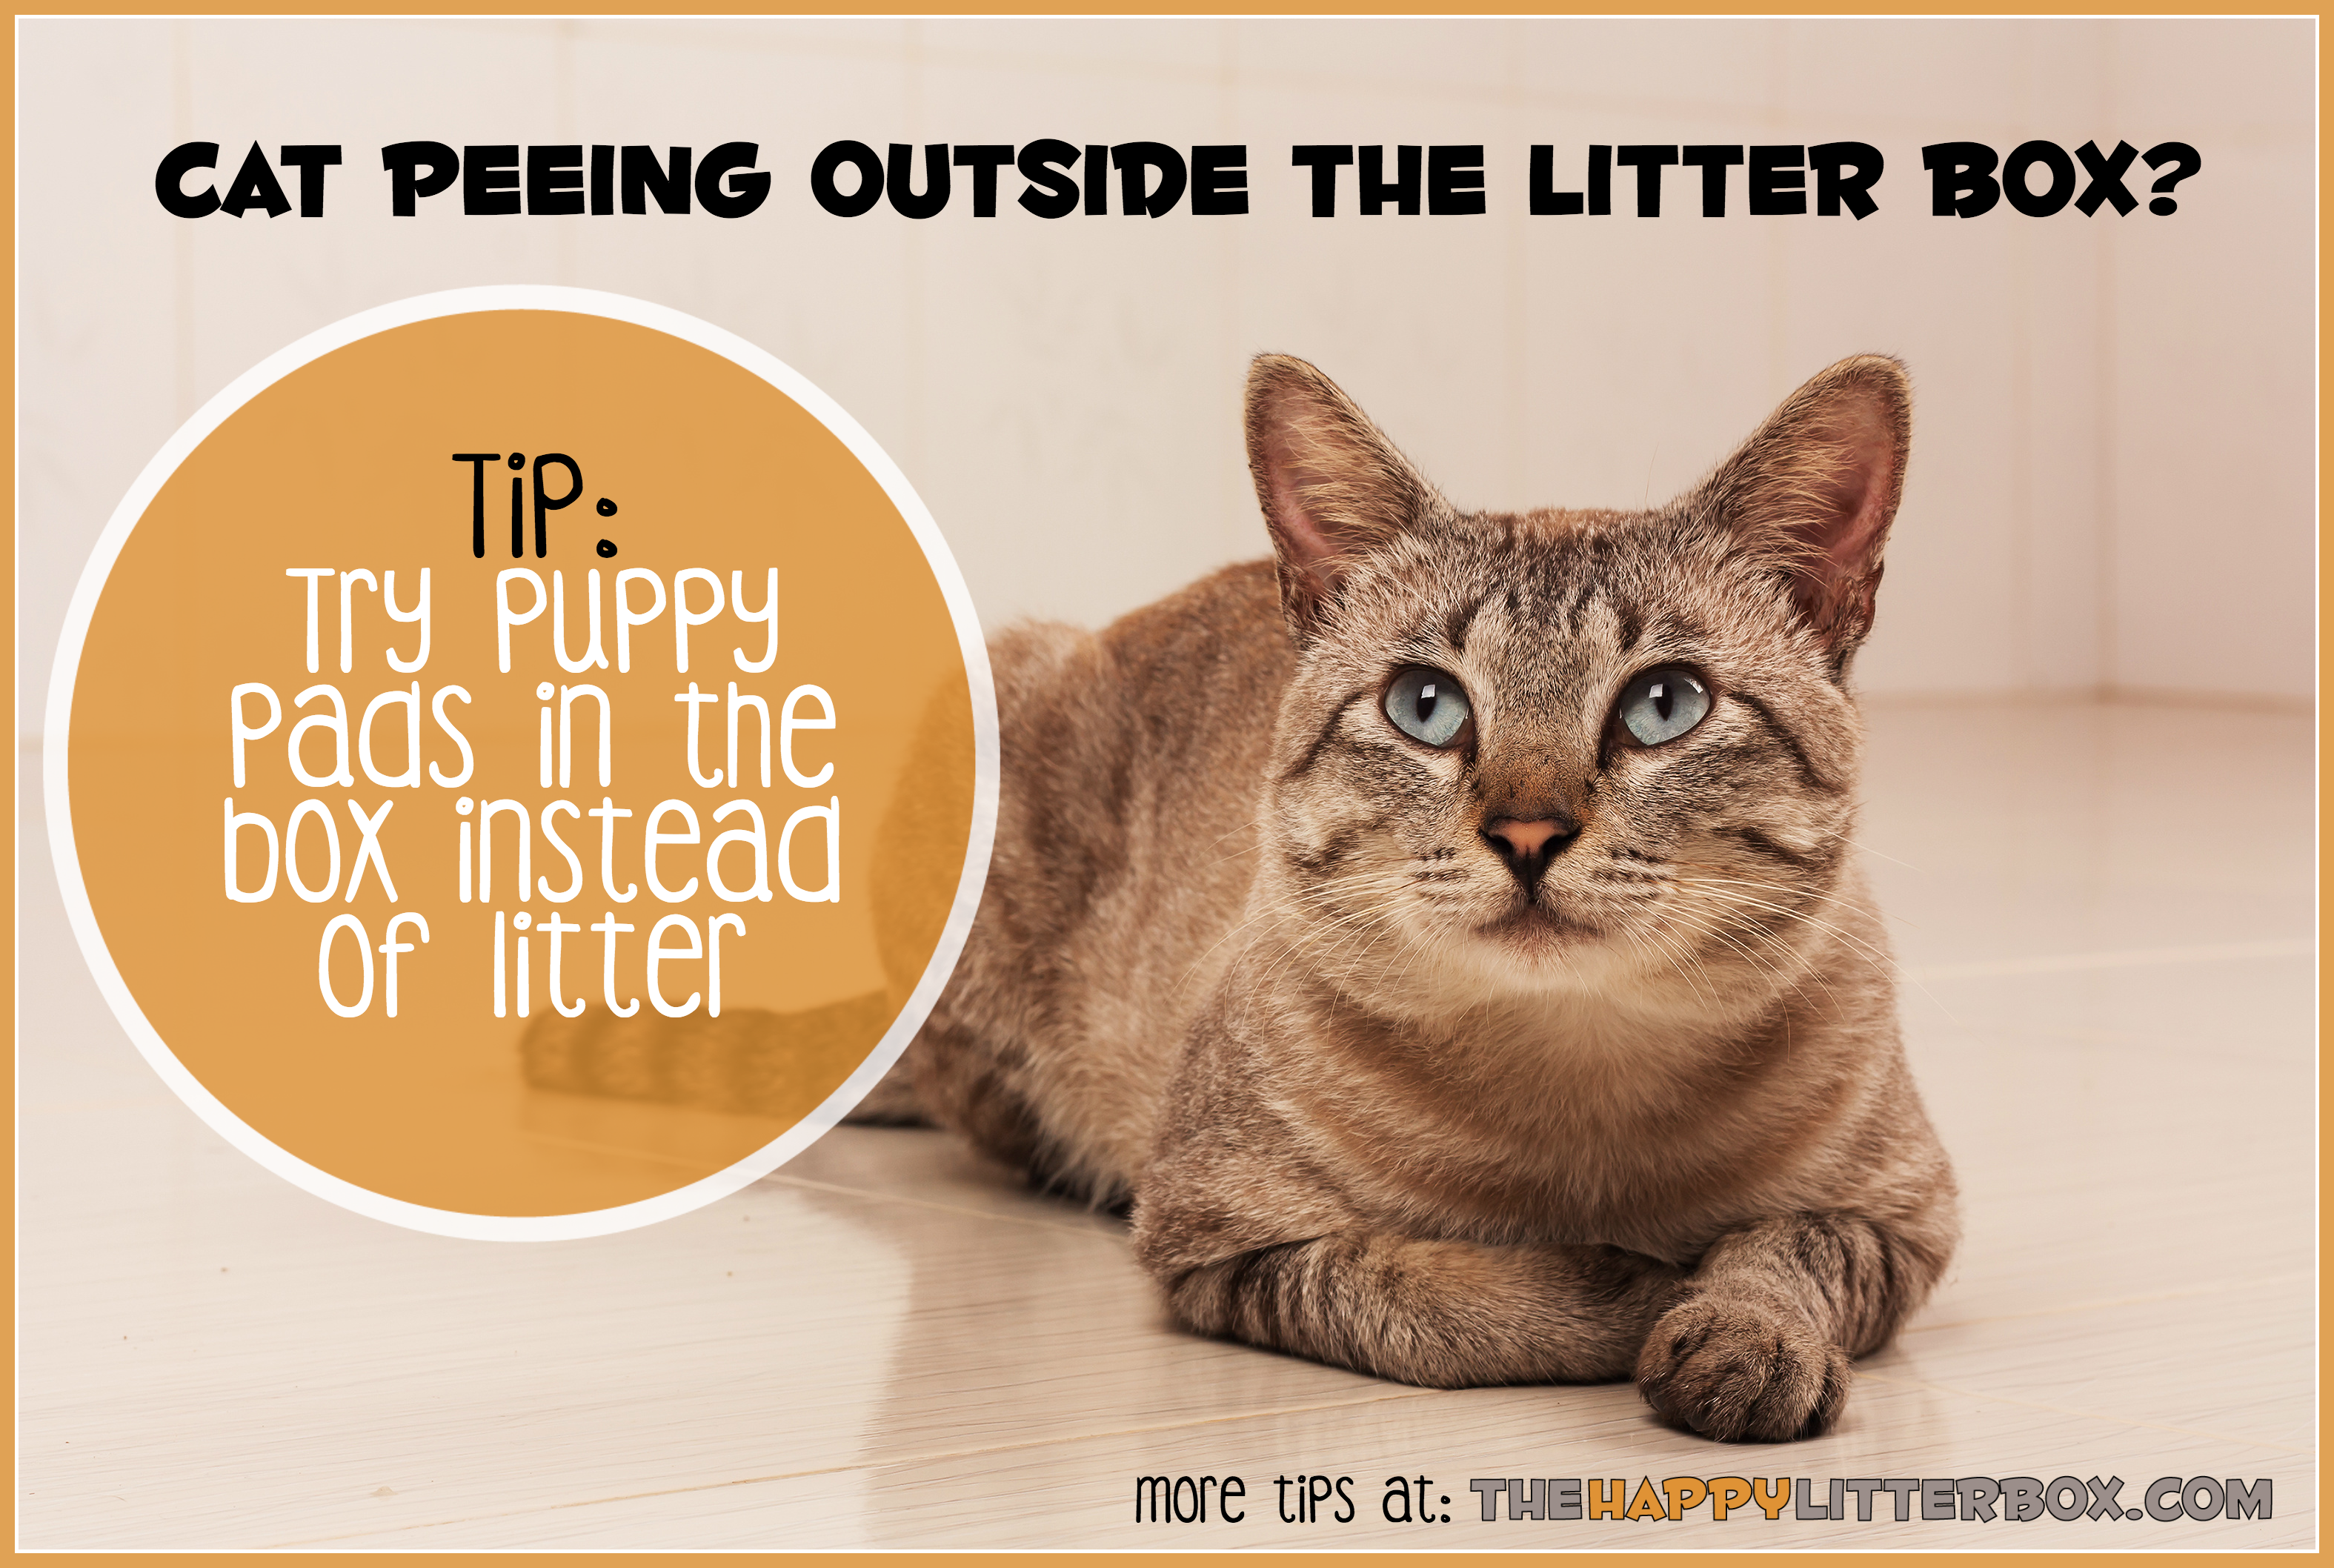 Cats peeing other than kitty litter box